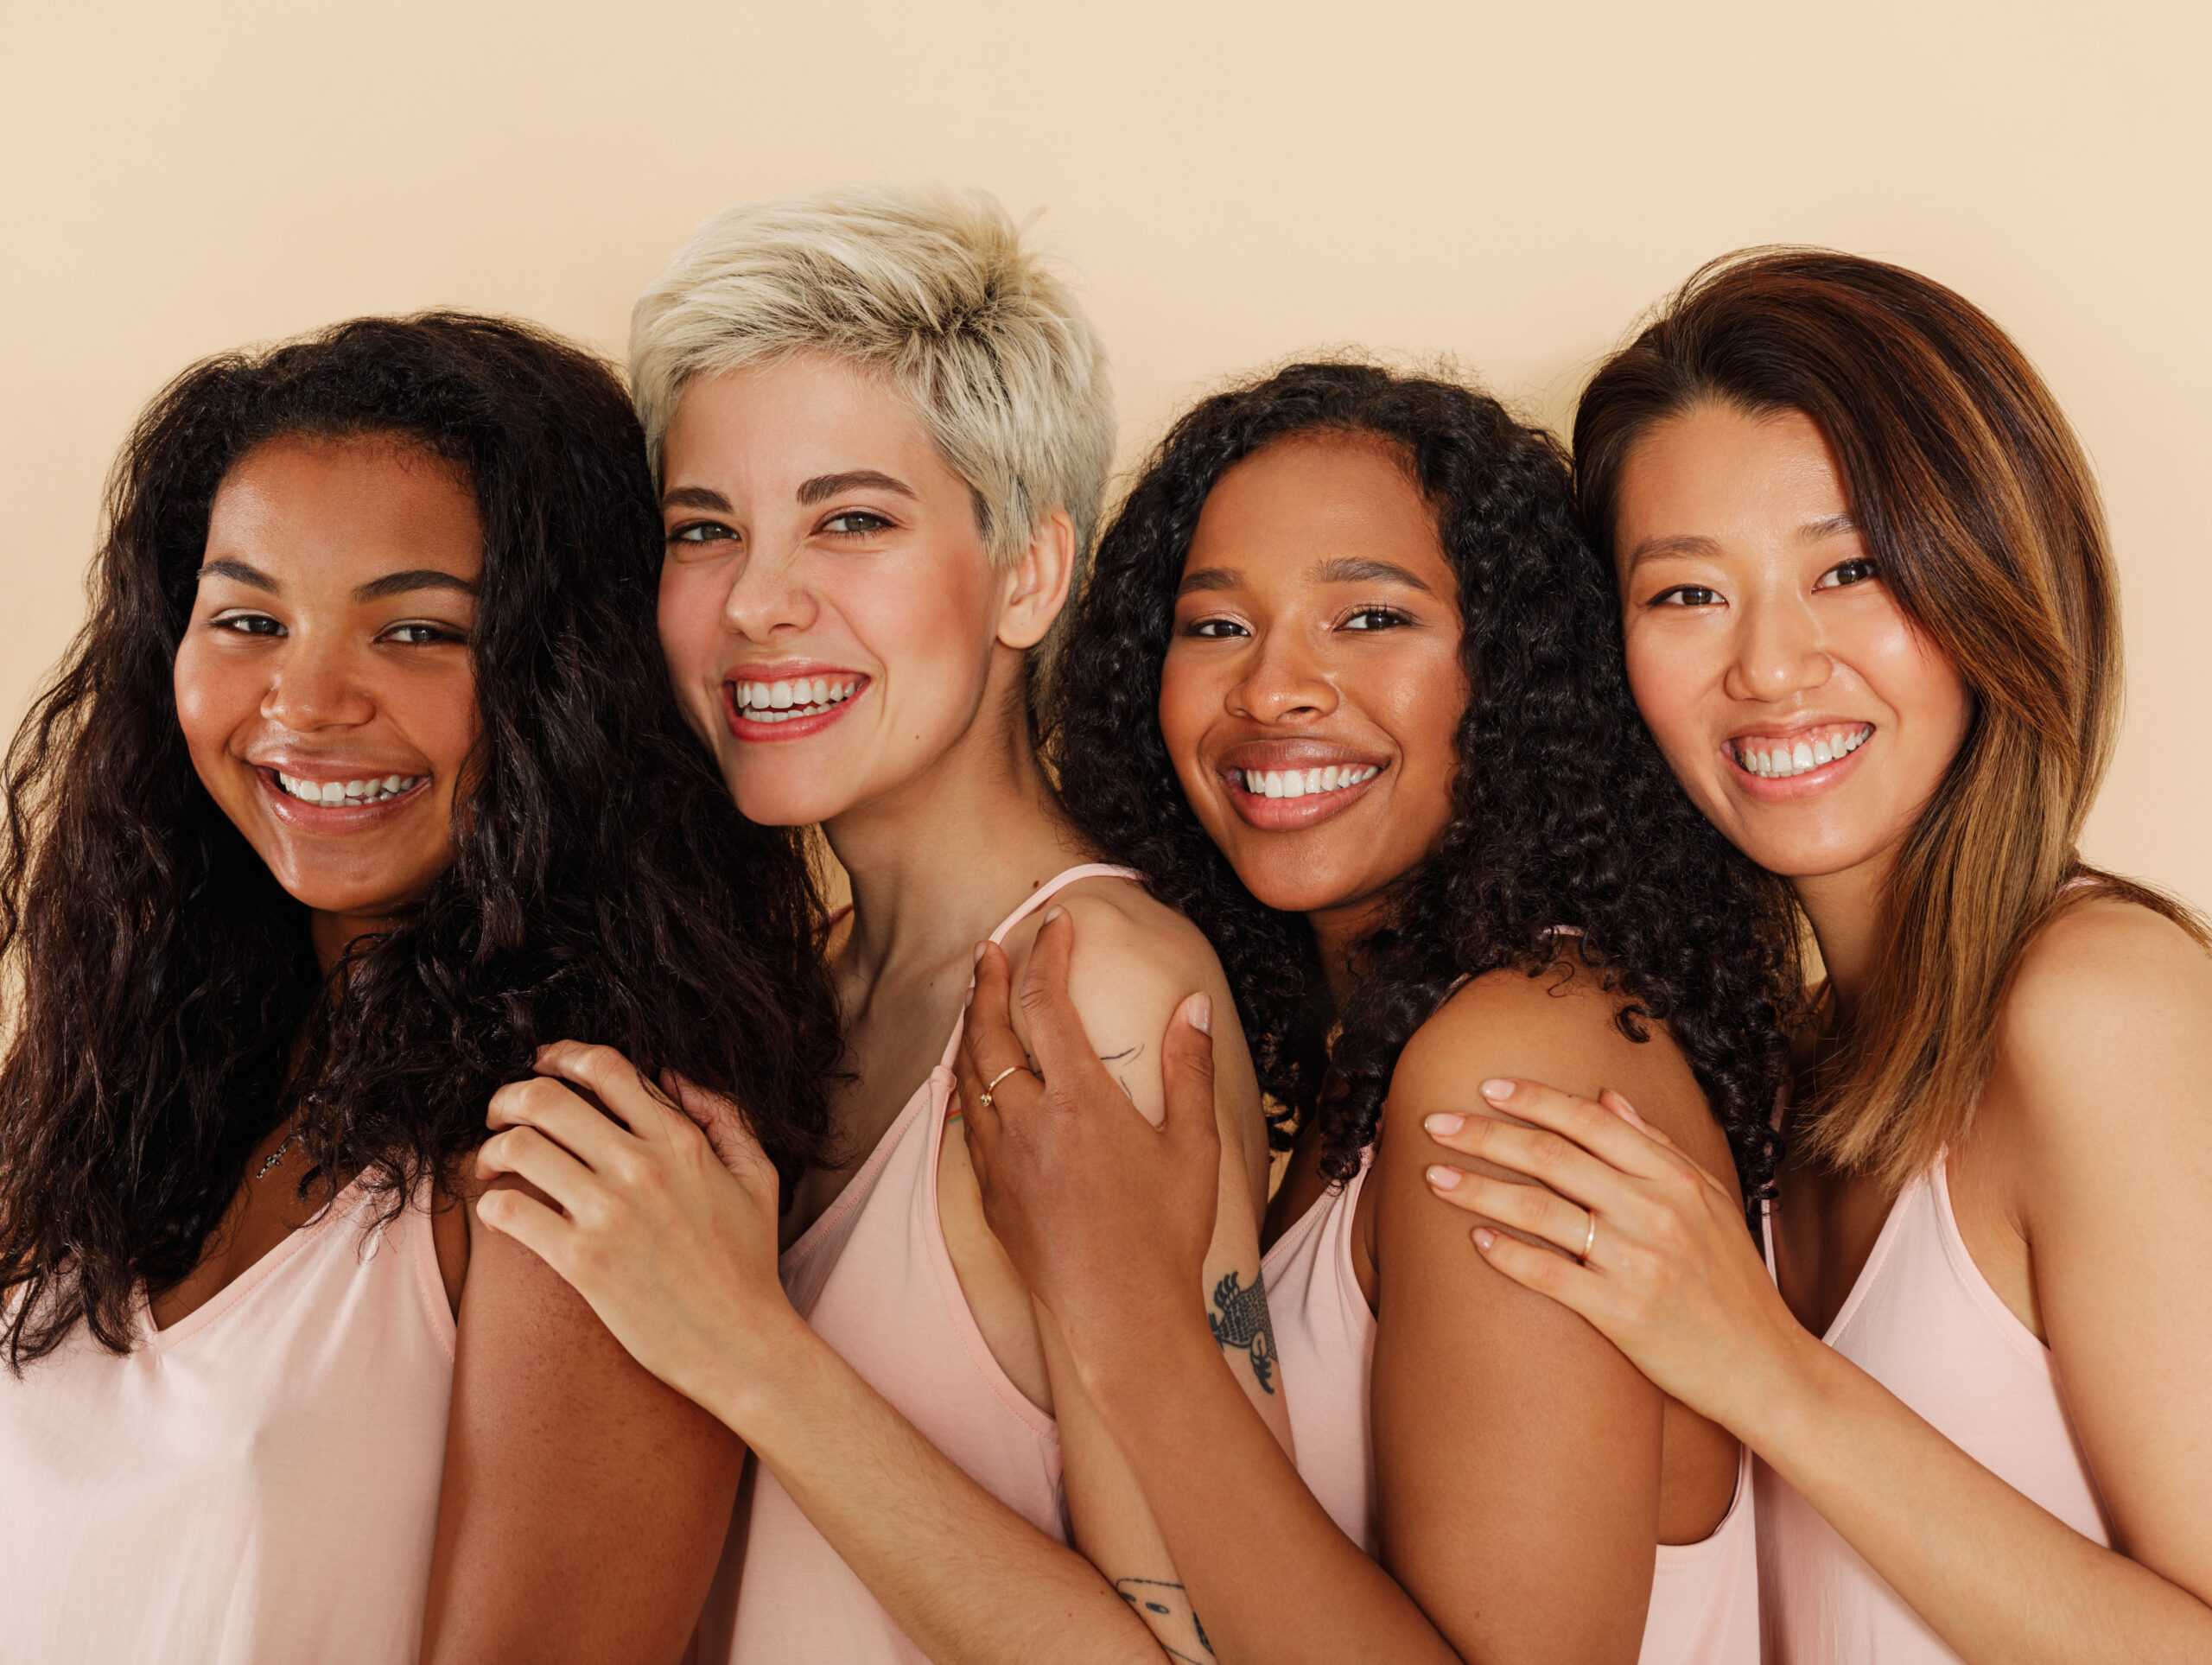 A group of four diverse, joyful women with beaming smiles, standing closely and embracing each other.